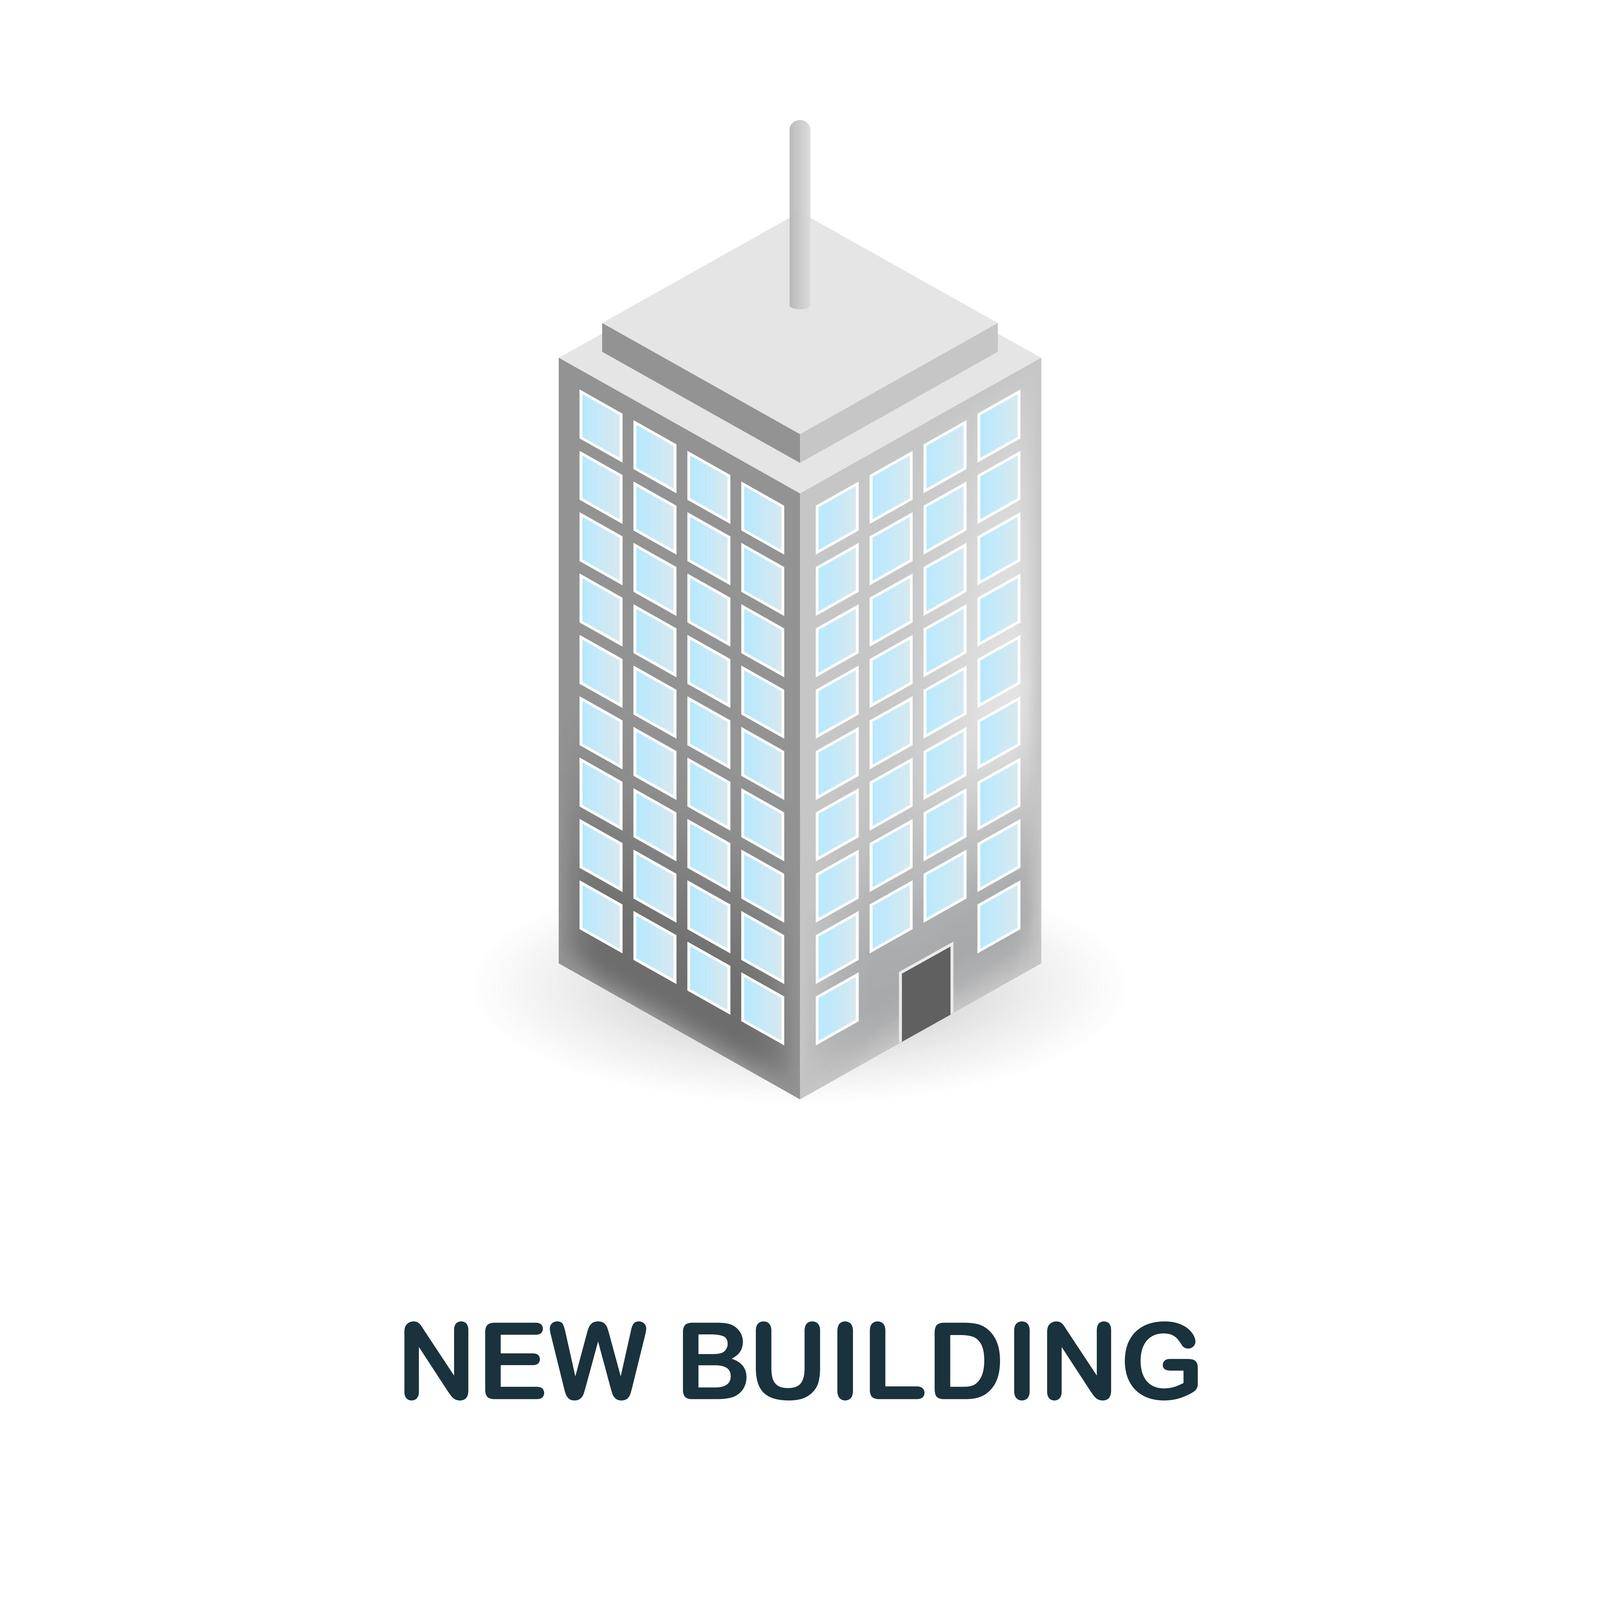 New Building 3d icon Simple illustration from buildings collection. Monochrome New Building icon for web design, templates and infographics.